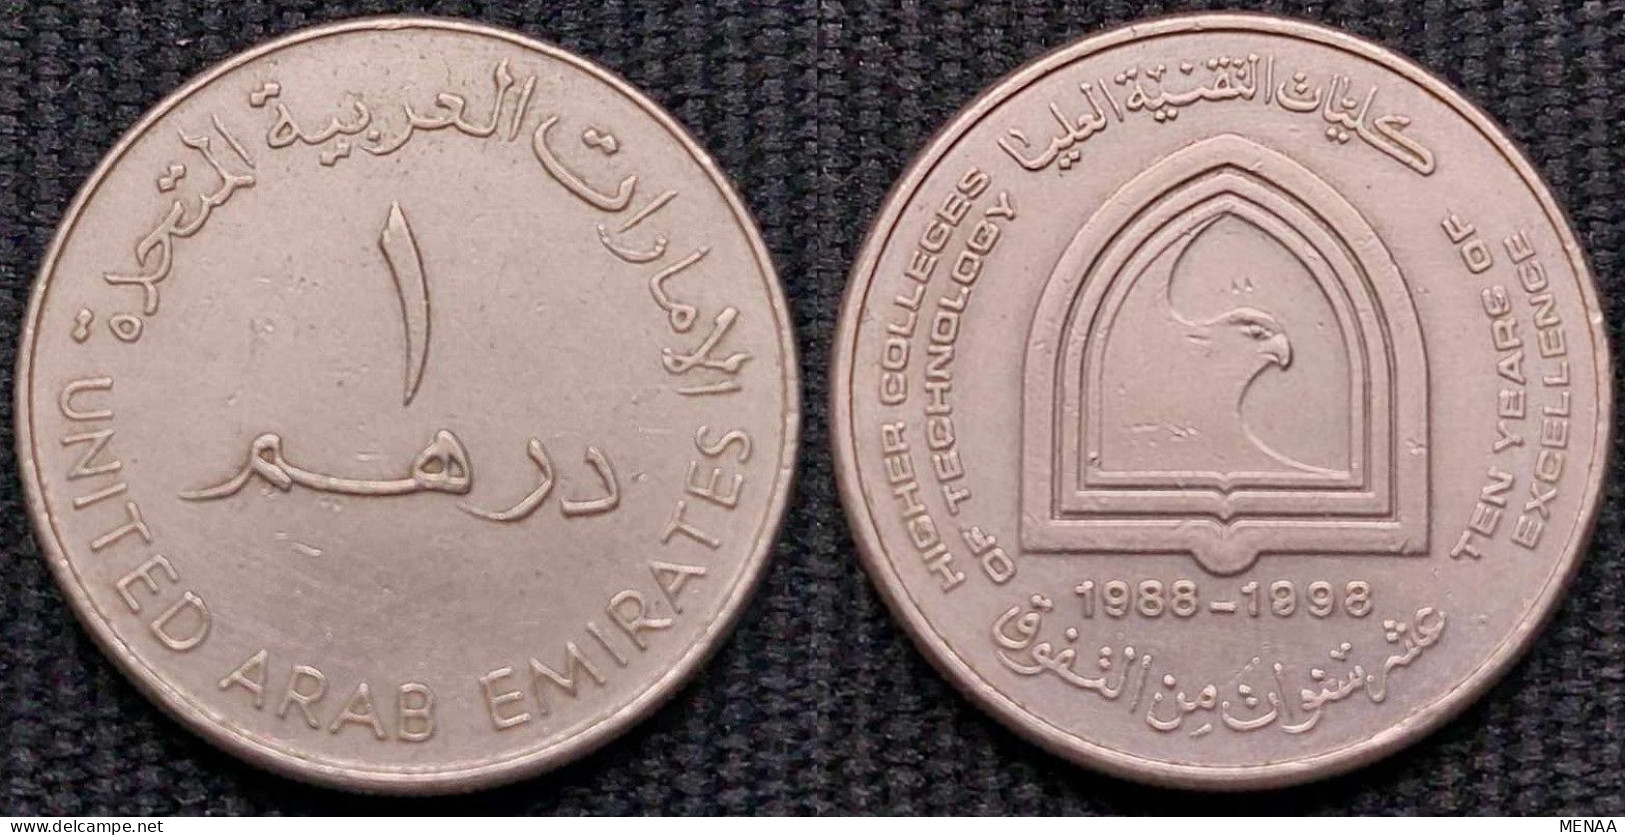 United Arab Emirates - 1 Dirham -1998 - The 10th Anniversary Of The Higher Colleges Of Technology-  - KM 35 - Emirats Arabes Unis